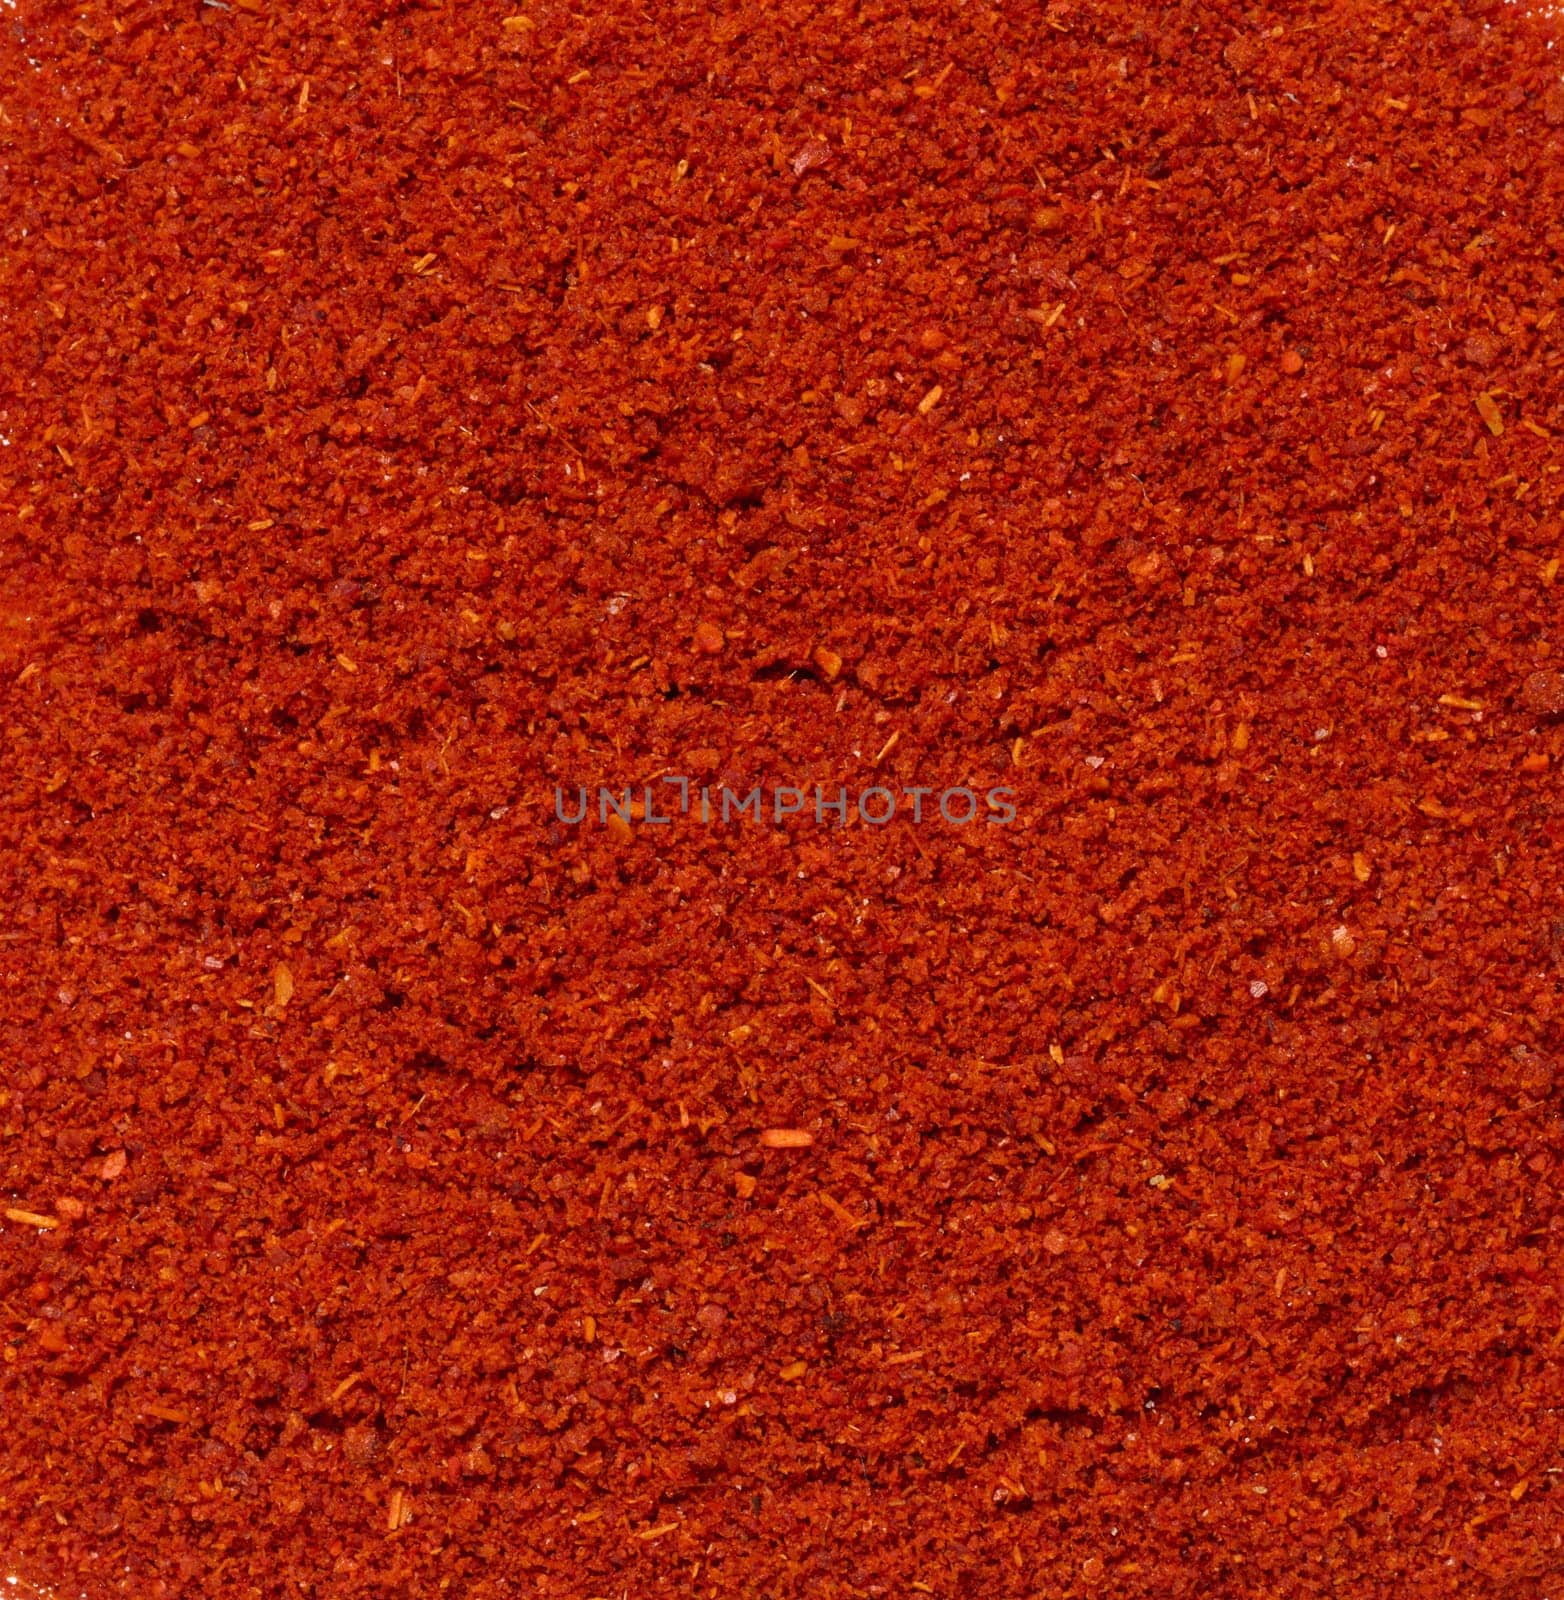 Texture of smoked ground red paprika, full frame